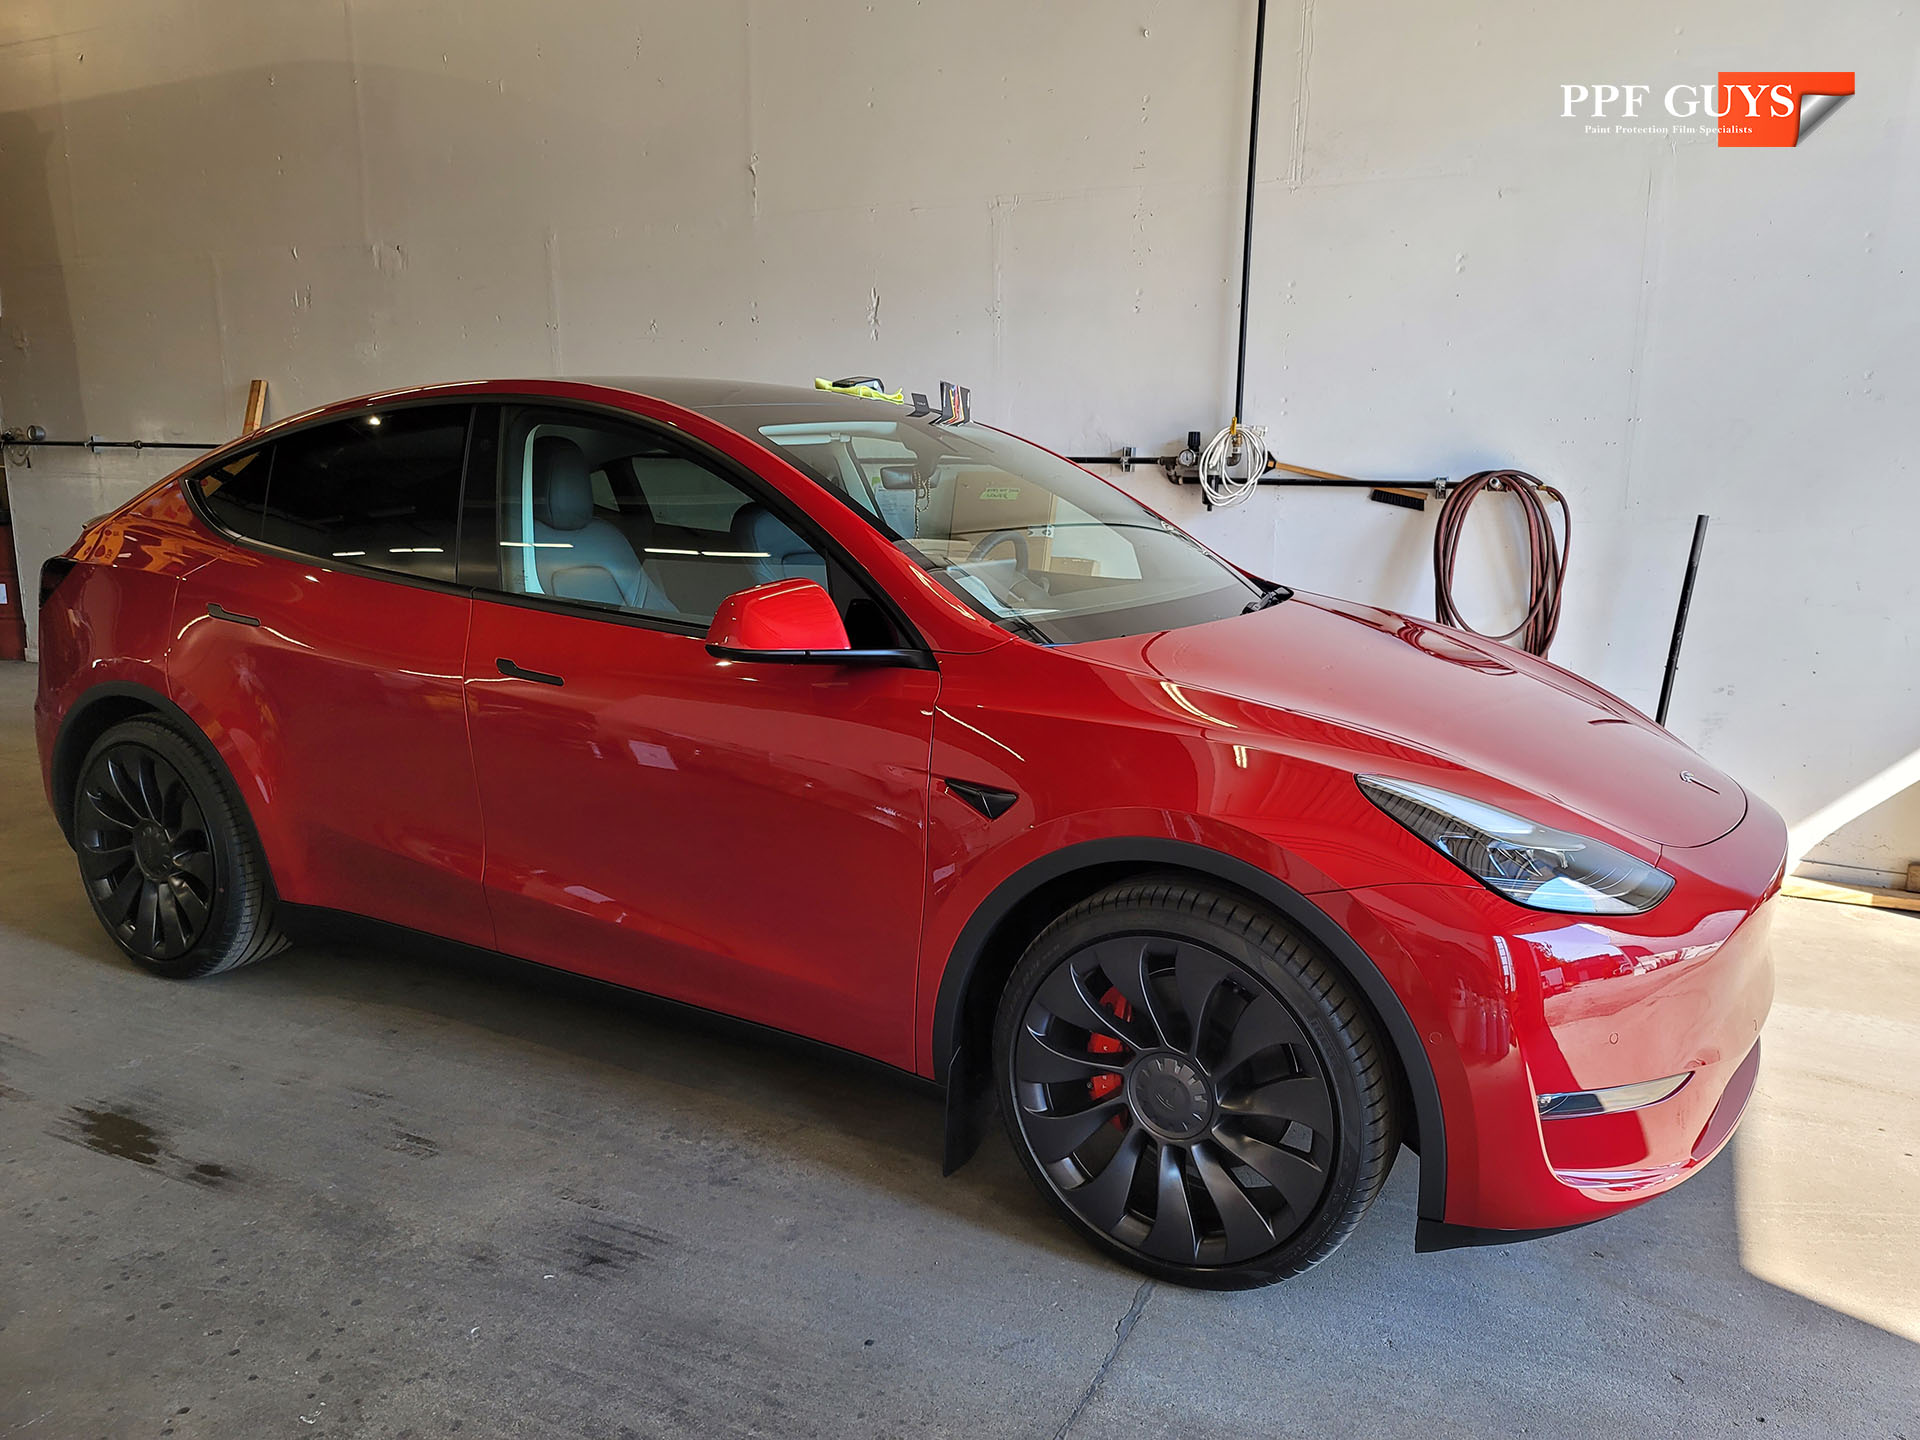 ppf guys model y p full xpel ultimate fusion (20).jpg